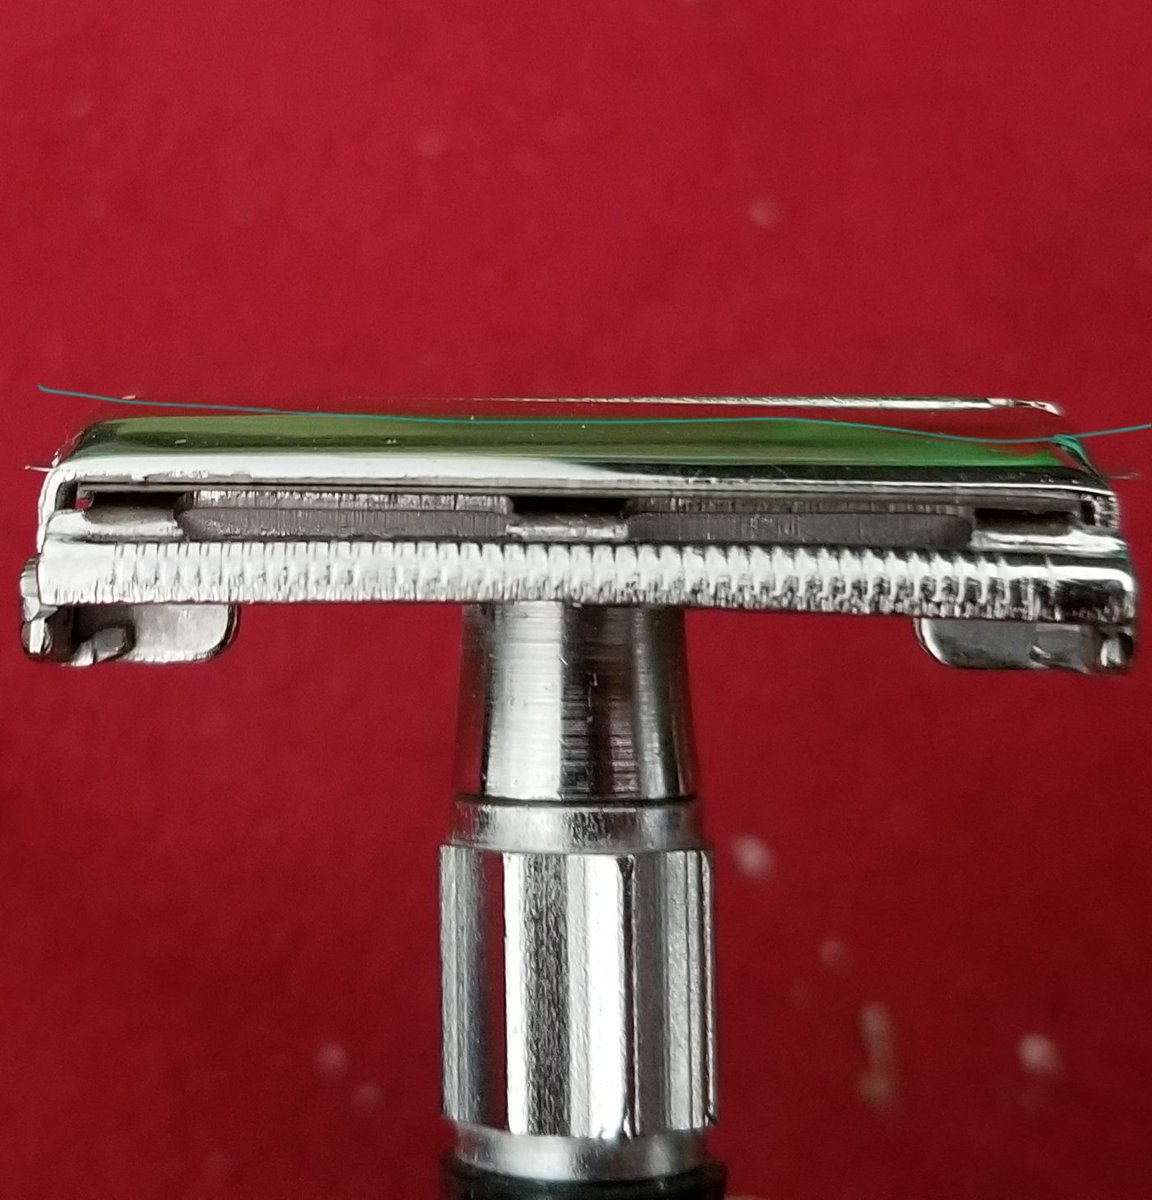 The black west coast shaving head I put on the handle for the $80 brand I have, warps the blade terribly with a sizeable bump in the middle, while the cheap barber supply razor with a chrome head holds the blade straight